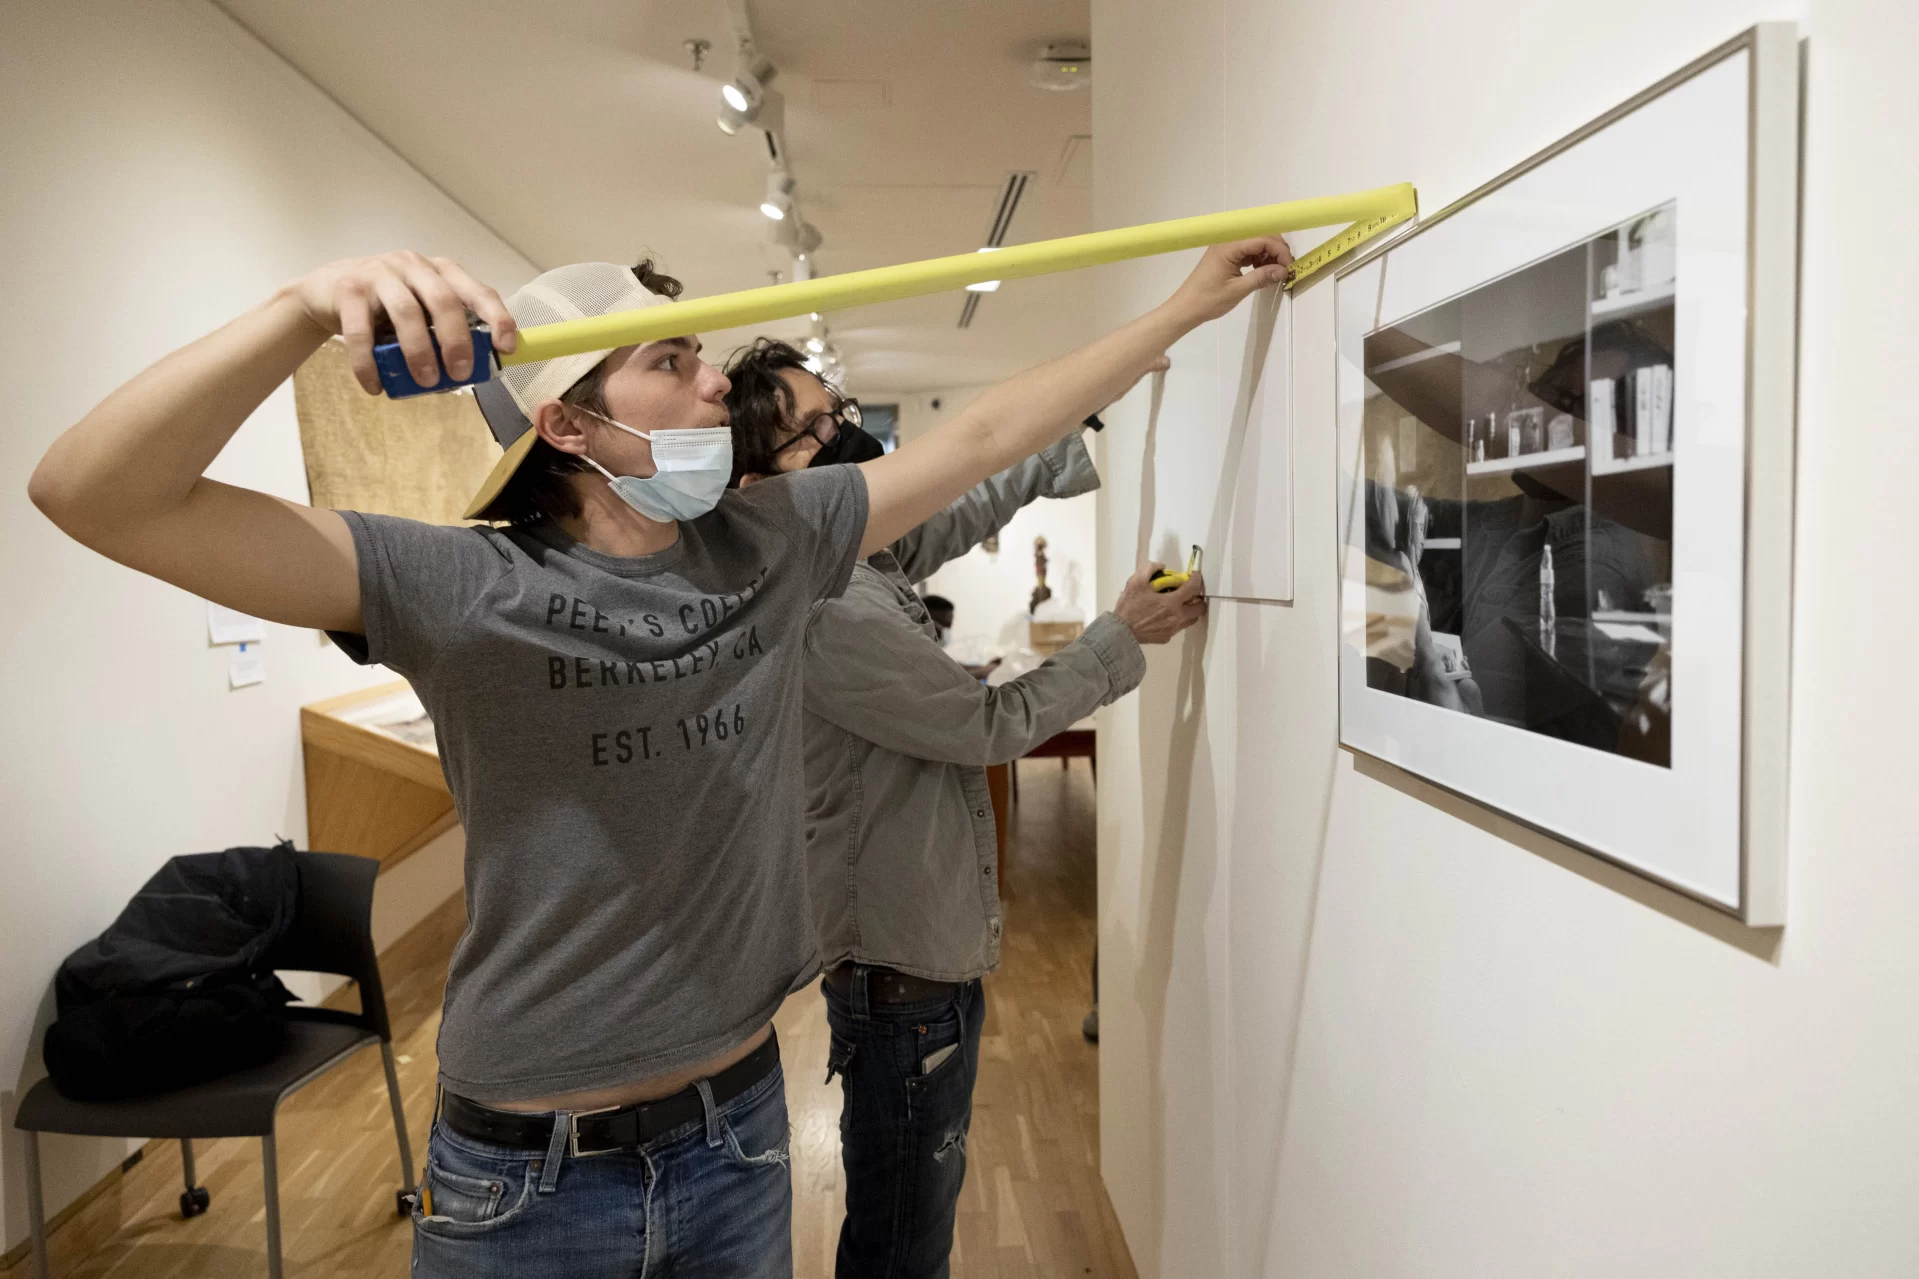 Studio art majors from the Class of 2022 begin to install their senior thesis exhibition in the Bates College Museum of Art with the help of their faculty adviser Elke Morris and museum staffers staffers Michel Droge, in grey long-sleeved shirt, and George Walsh, in green t-shirt.

Students shown are seniors Ollie Penner of Pasadena, Calif.,  in green collared shirt, Anna Gouveia of Jenkintown, Pa., in purple pants, John Ryan with dark sweater and John Loftus of Palo Alto, Calif.,in baseball cap.